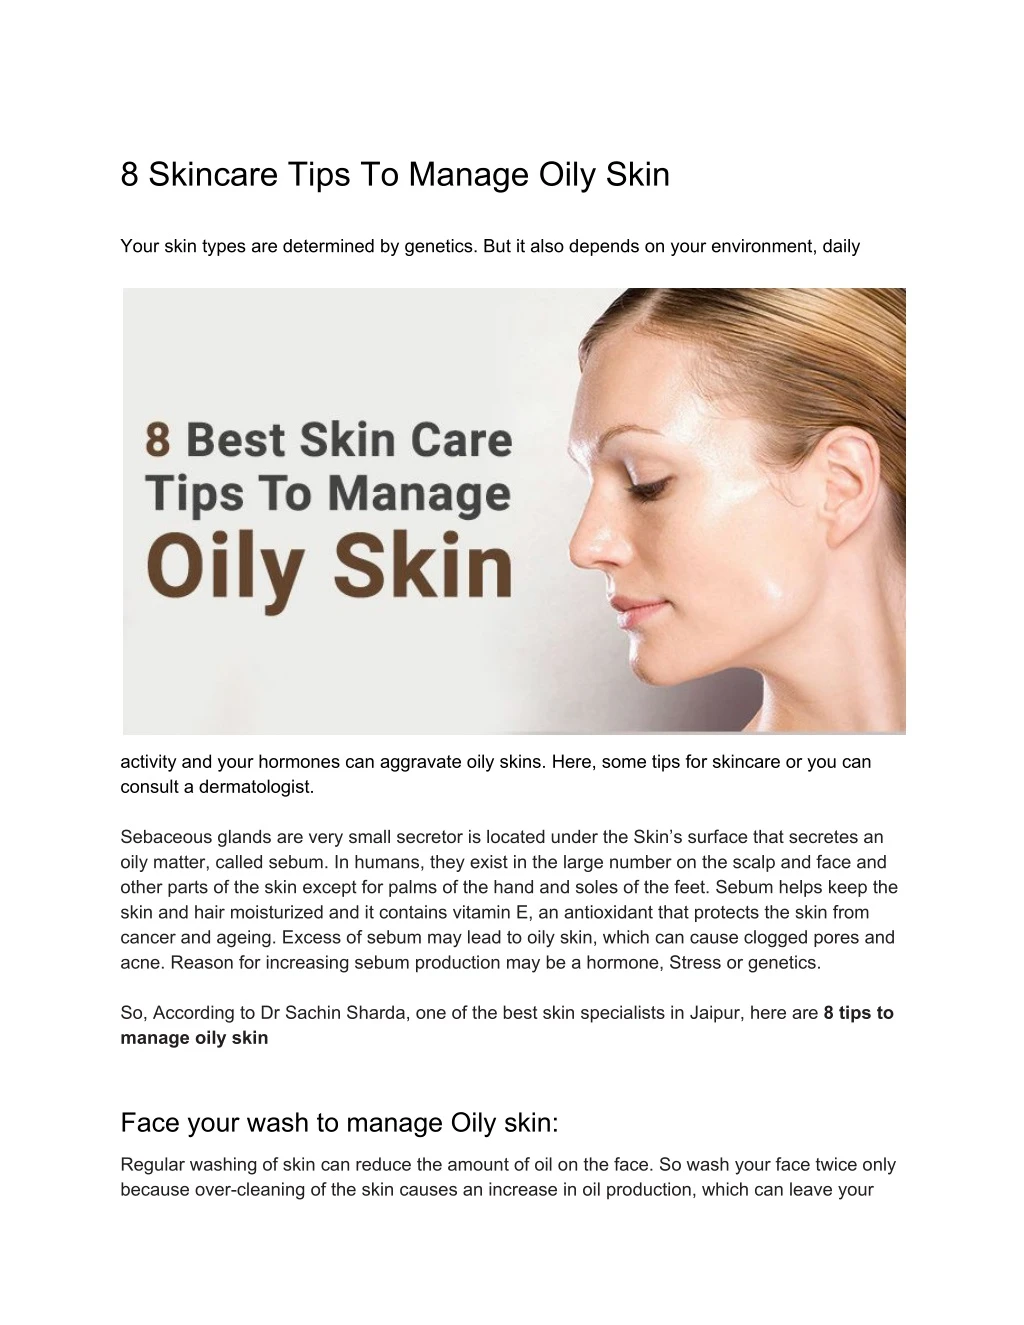 8 skincare tips to manage oily skin